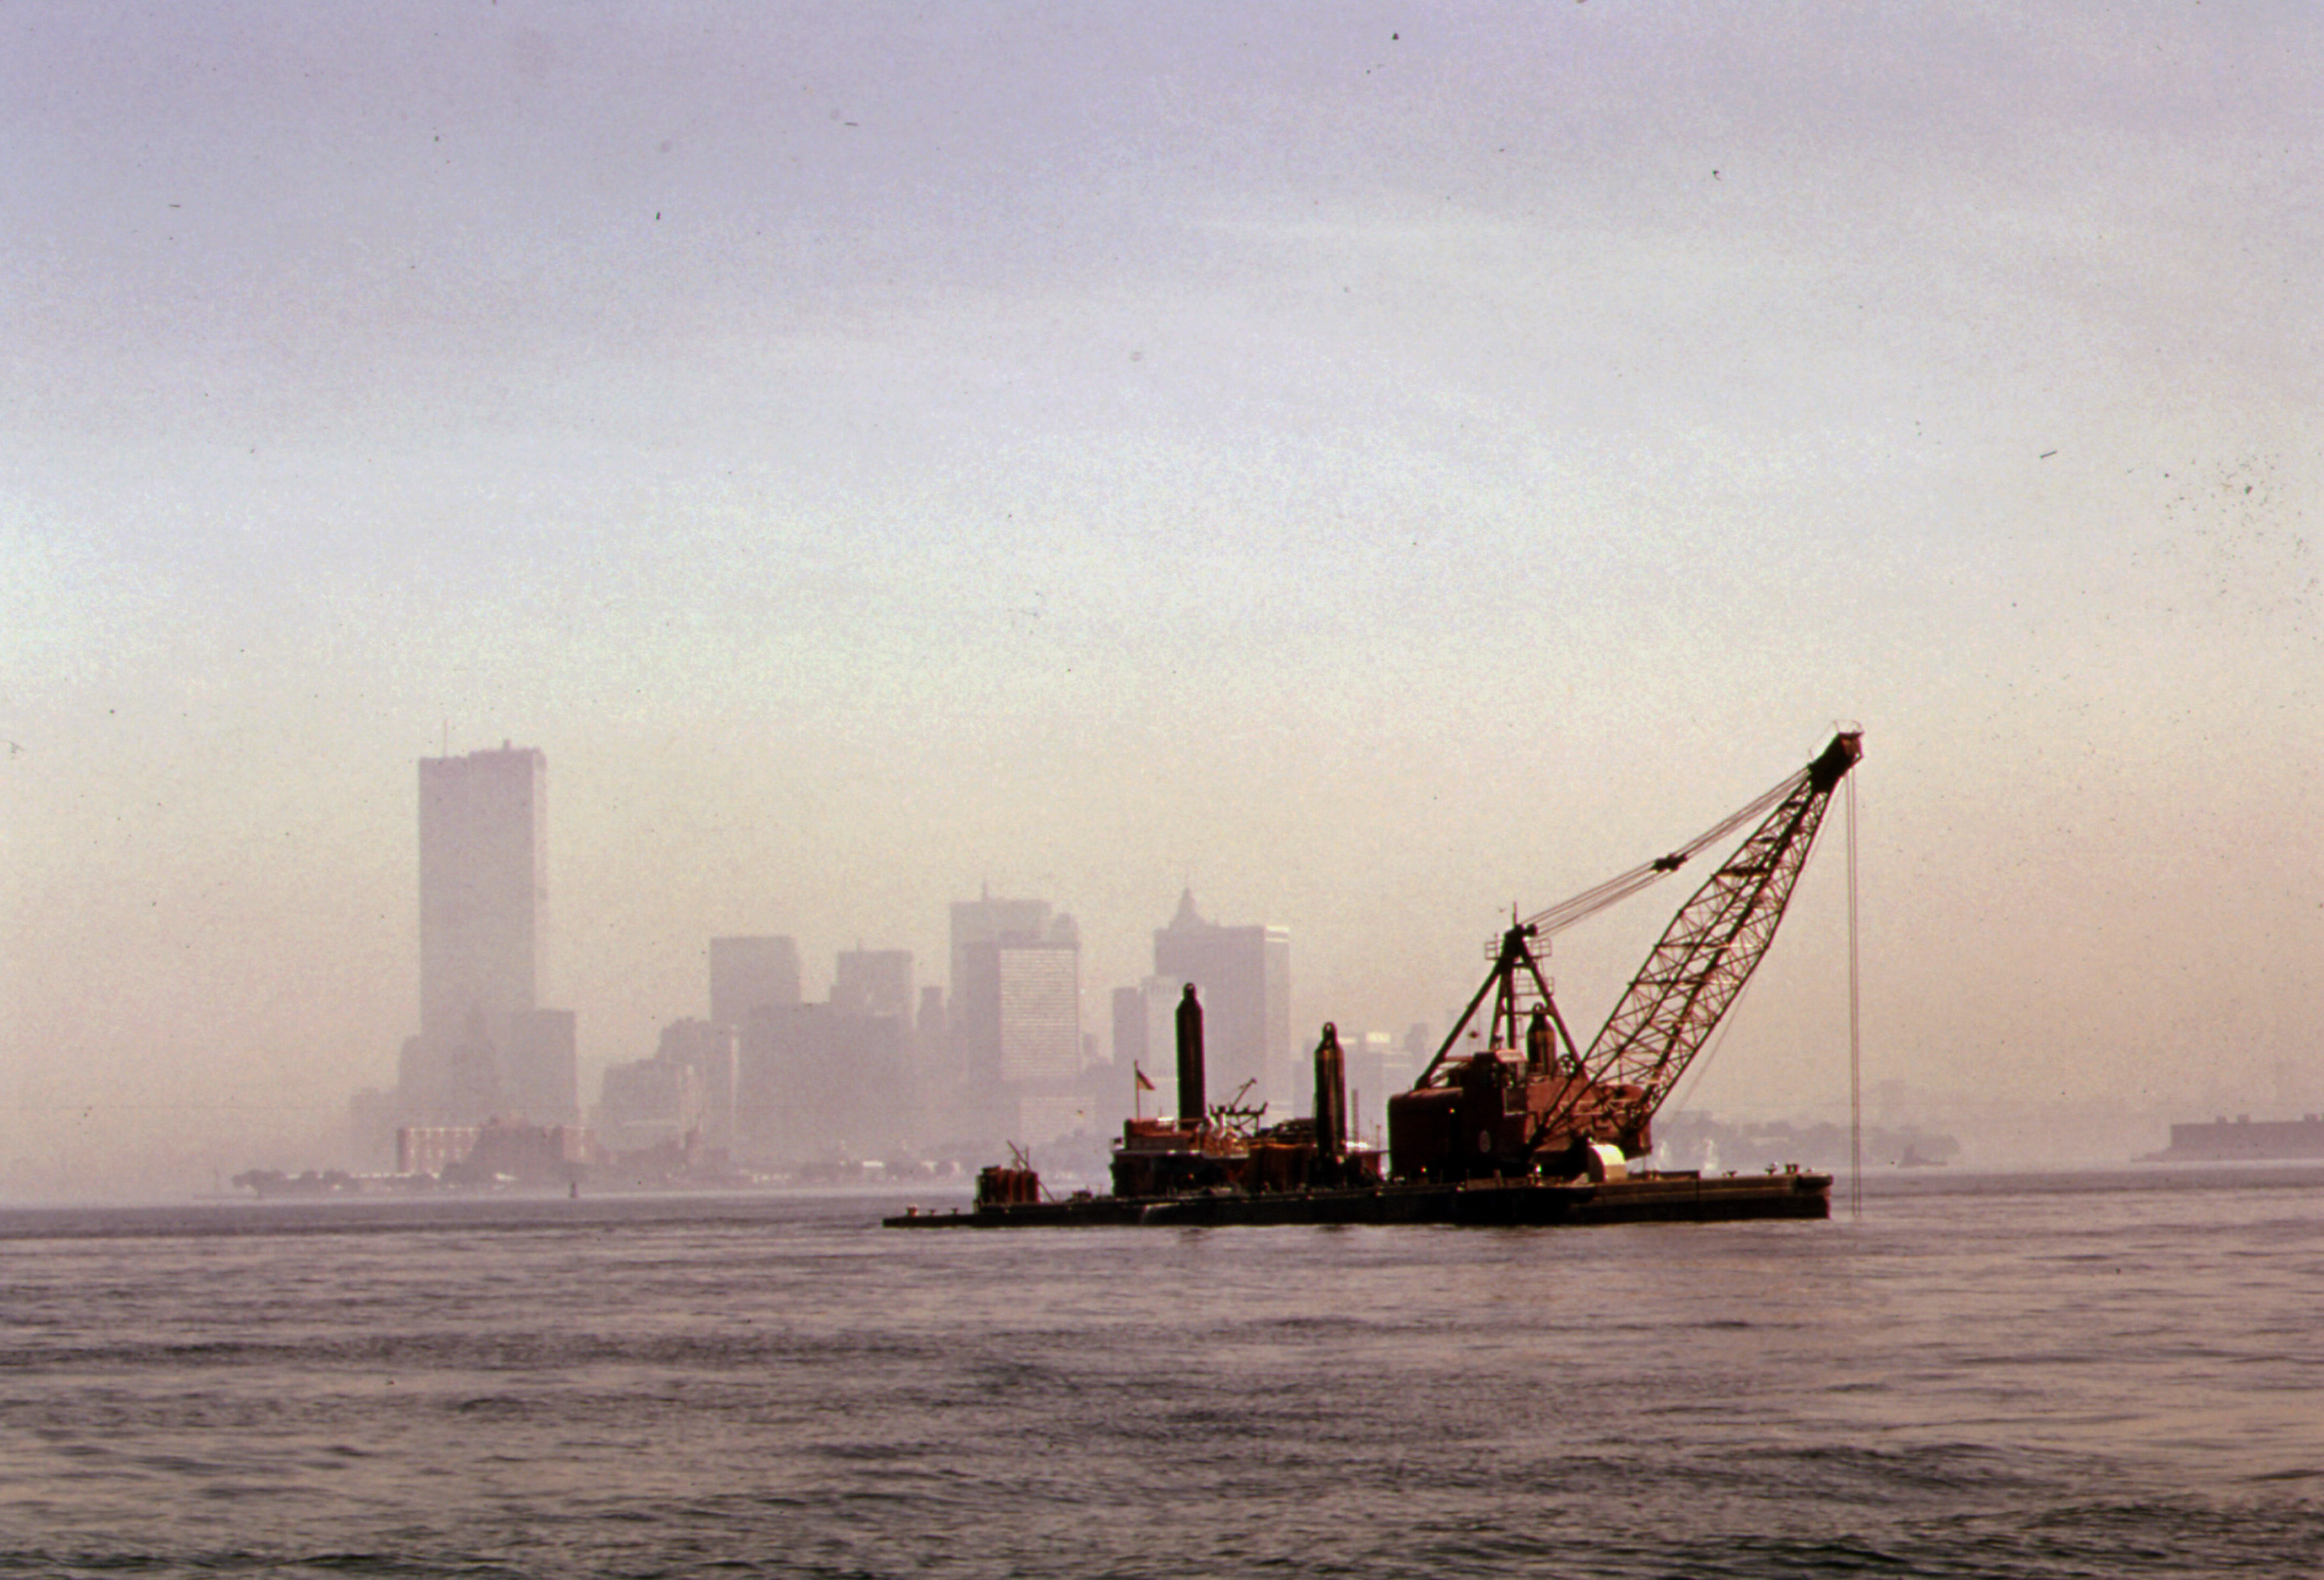 A crane dredge in water in front of a hazy city skyline